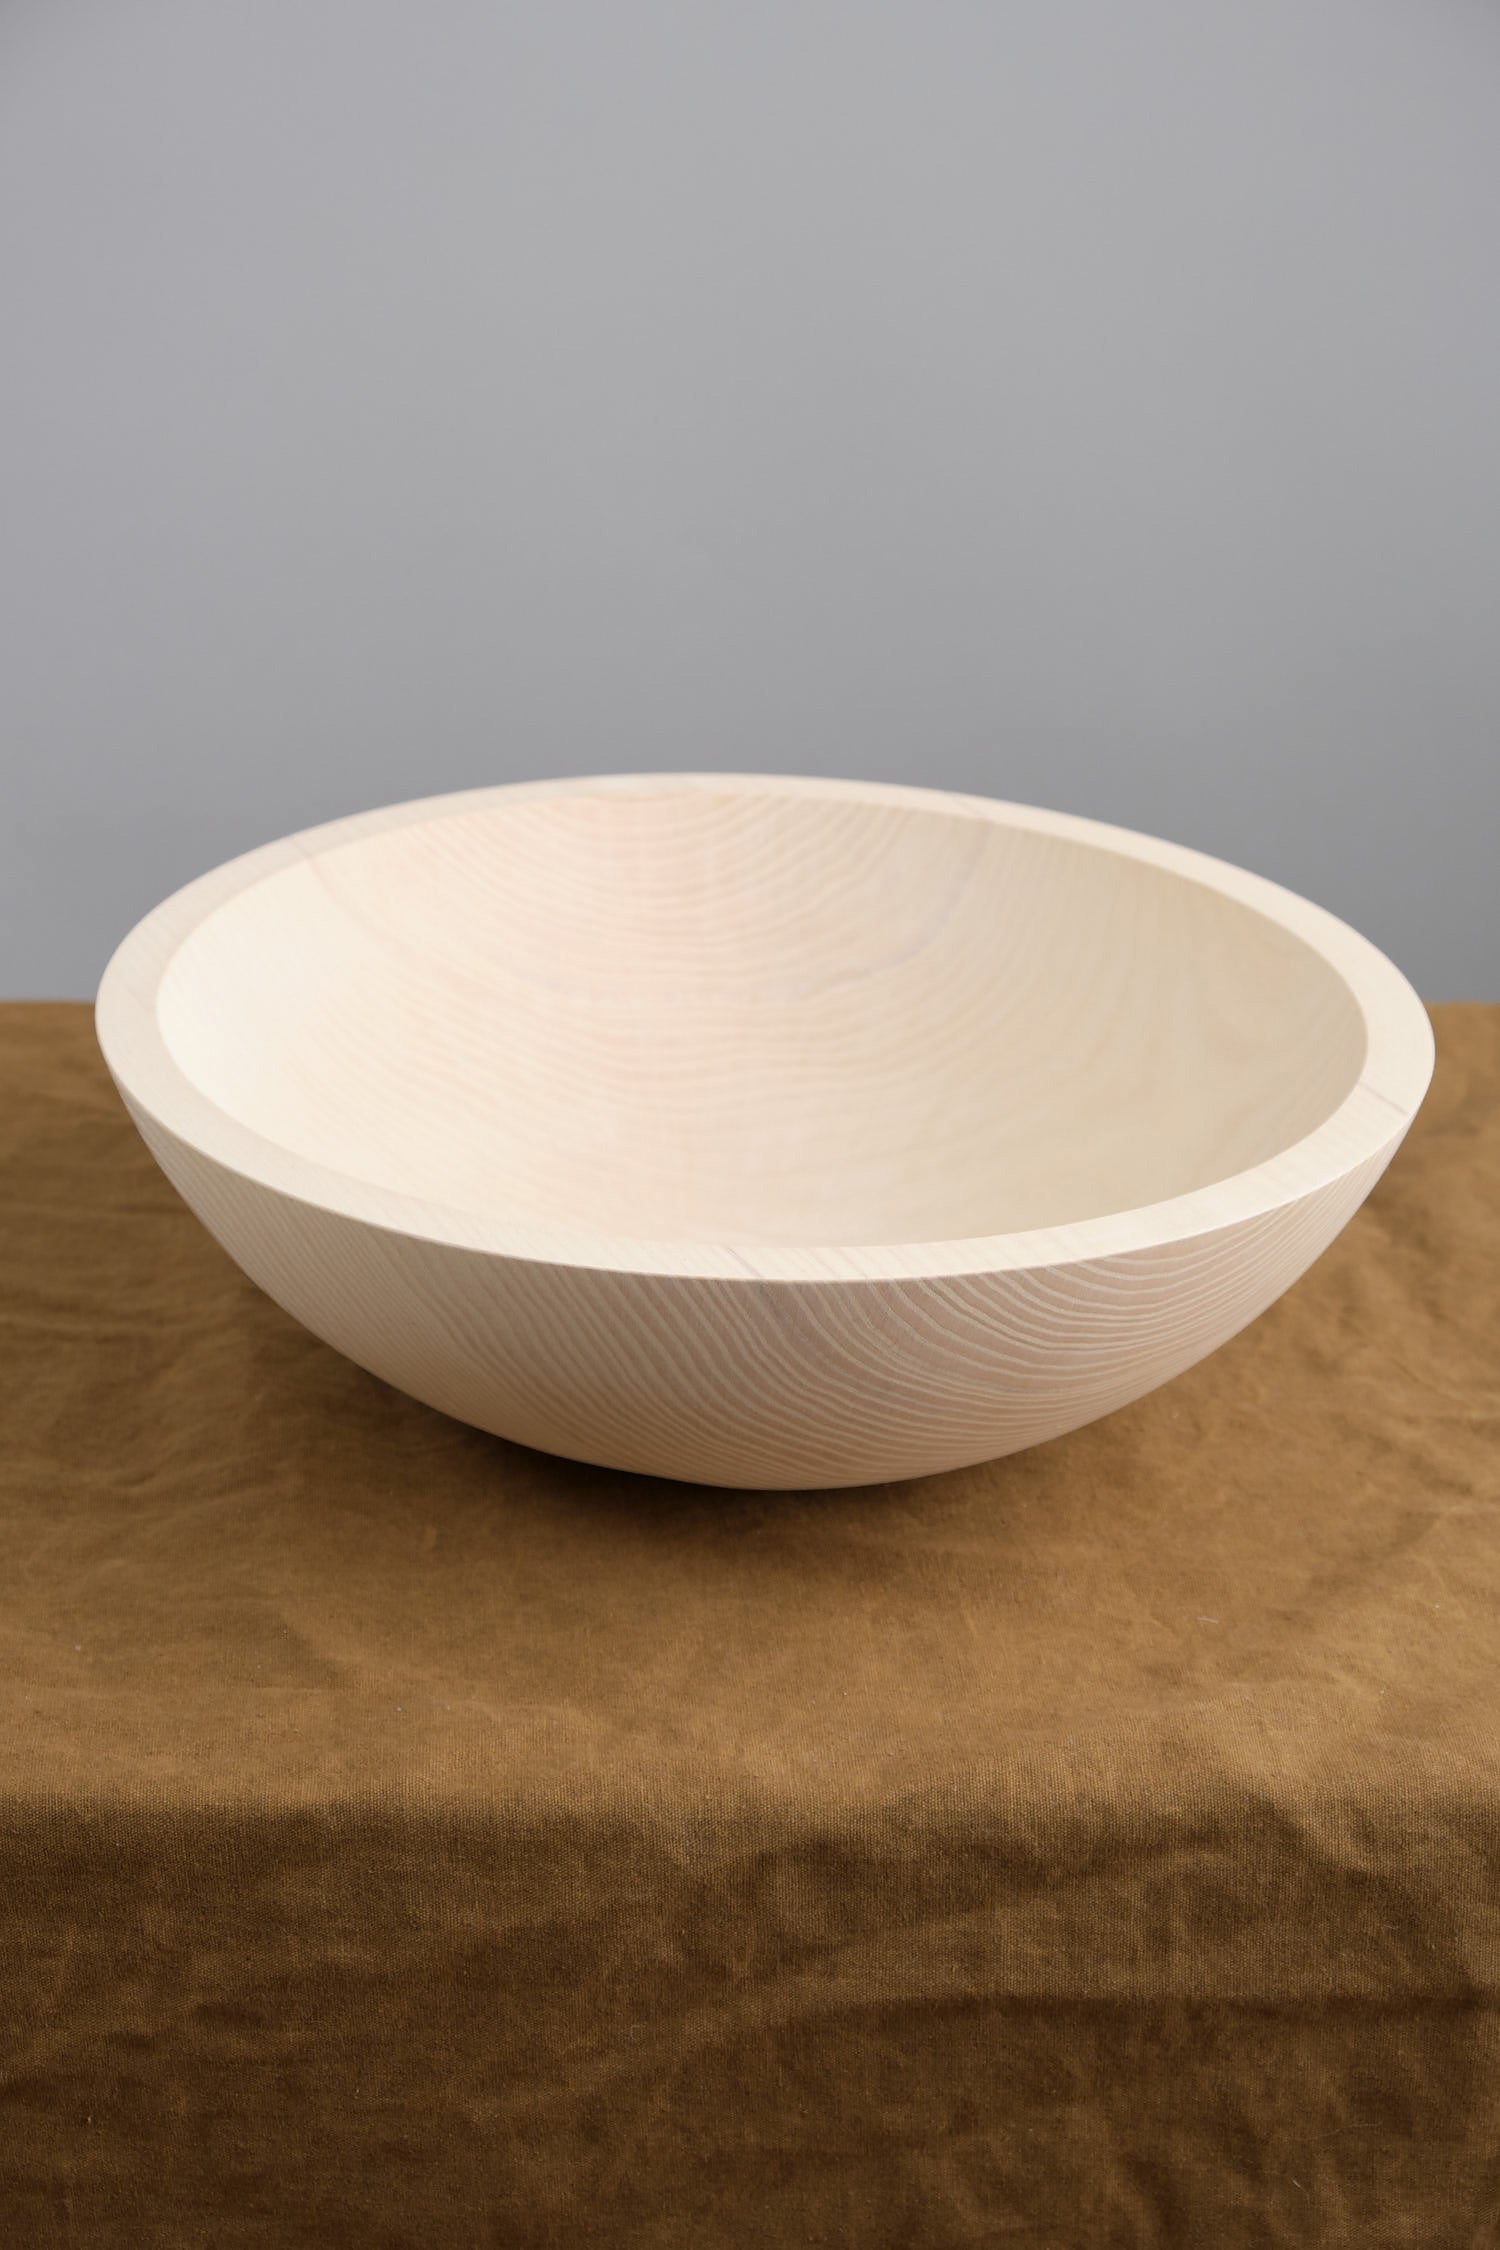 Bowl on table